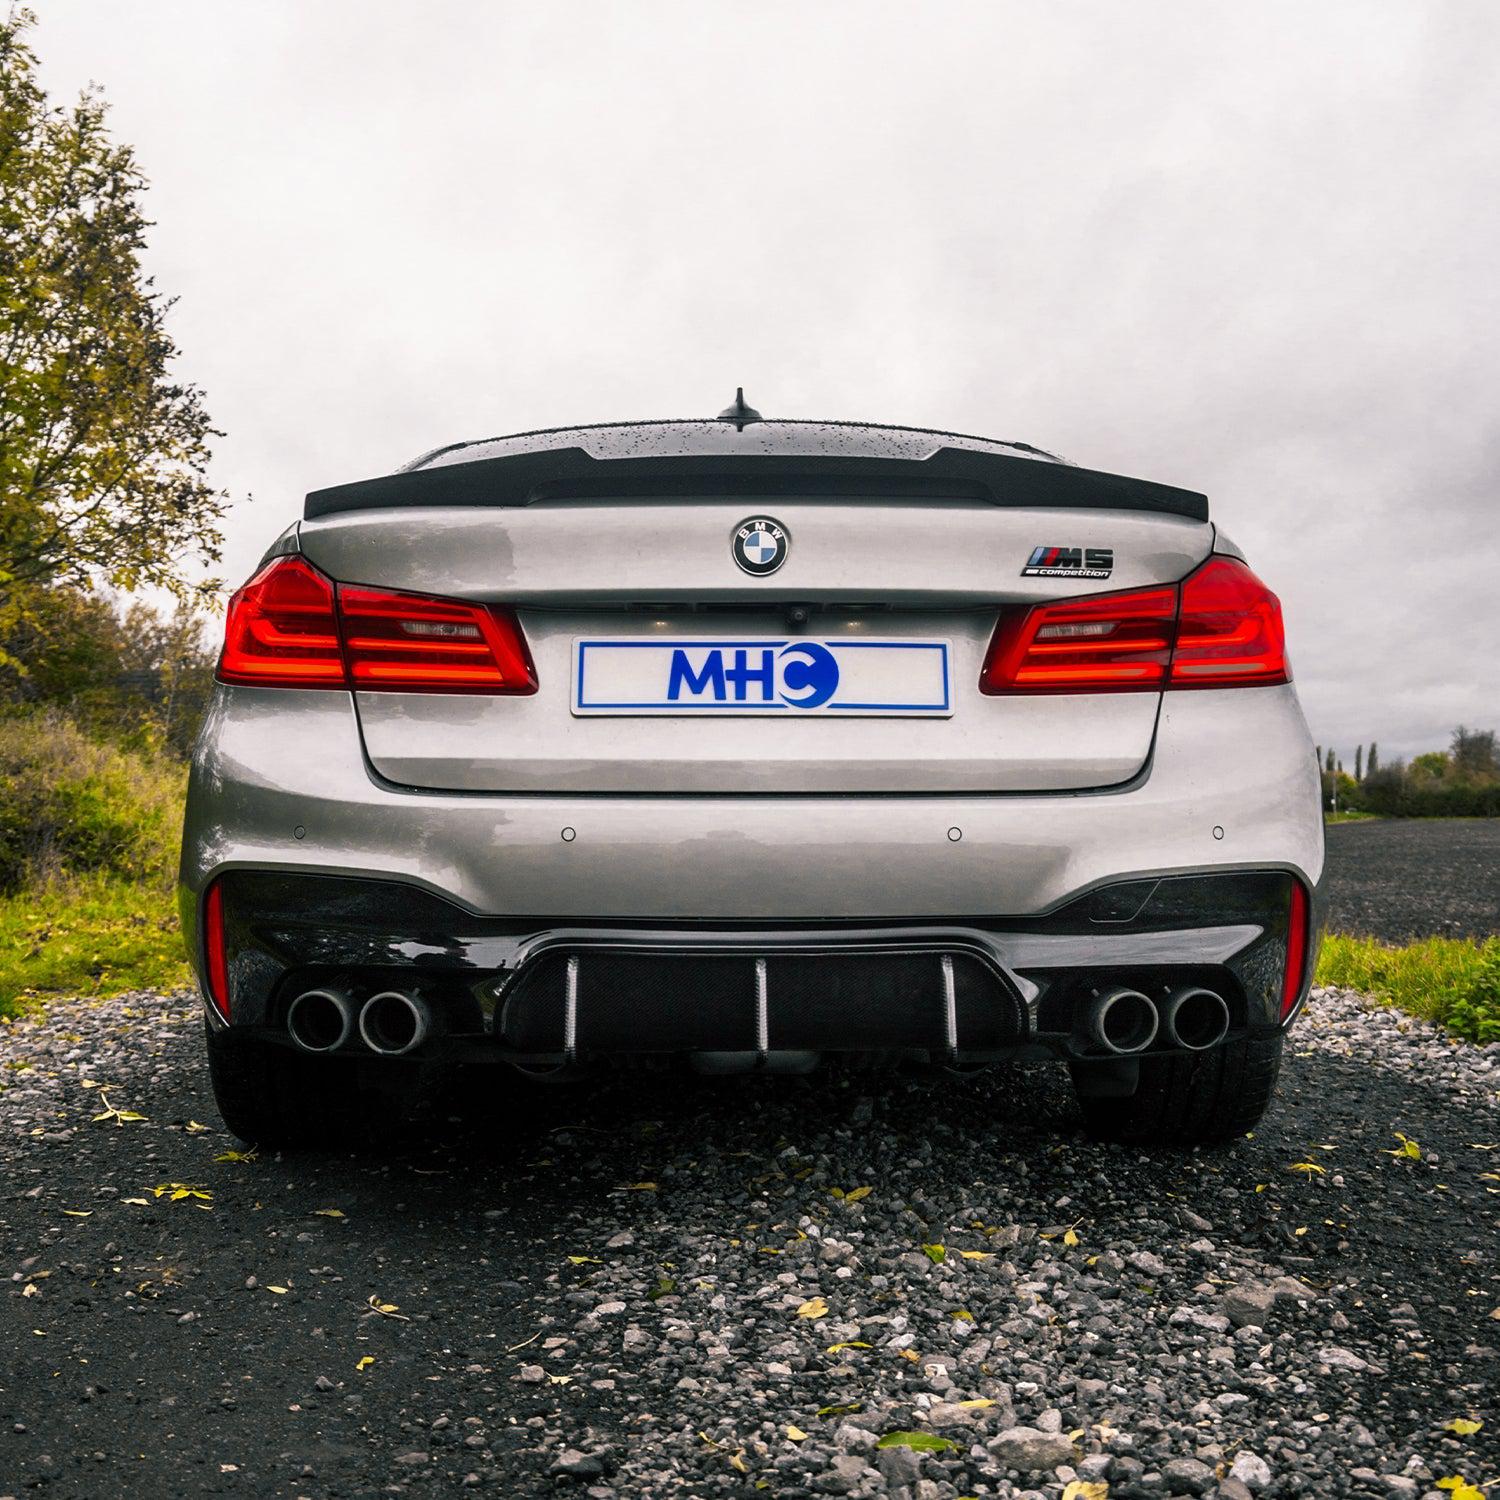 MHC+ BMW F90 M5 G30 5 Series Carbon M4 Style Rear Spoiler